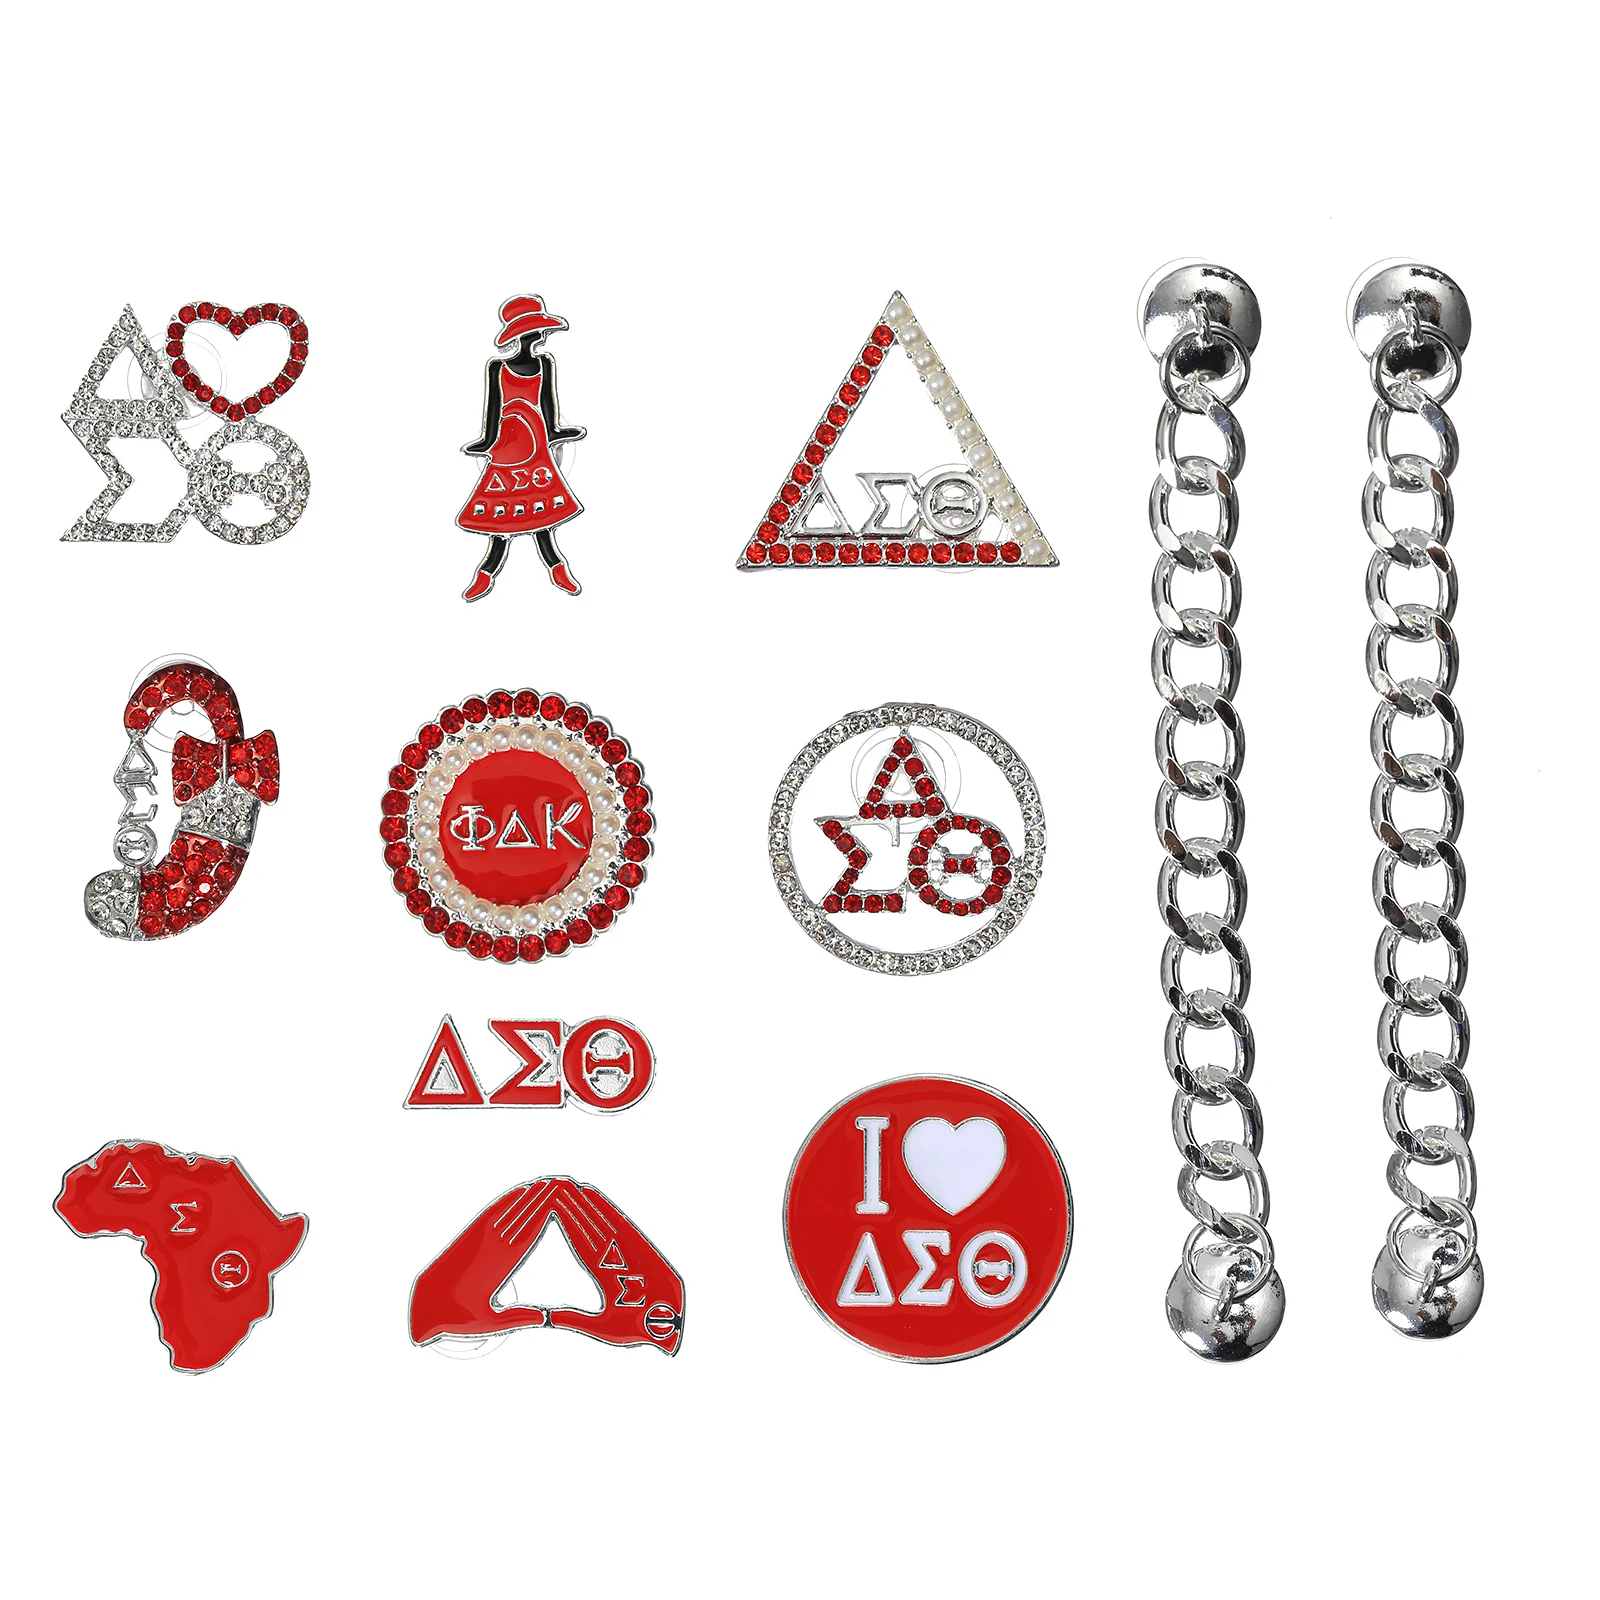 12pcs Aolly ΔΣΘ  Sorority Shoe Charms Set Accessories Decorations Croc Jibz Buckle for DIY X-mas Gift CBC163